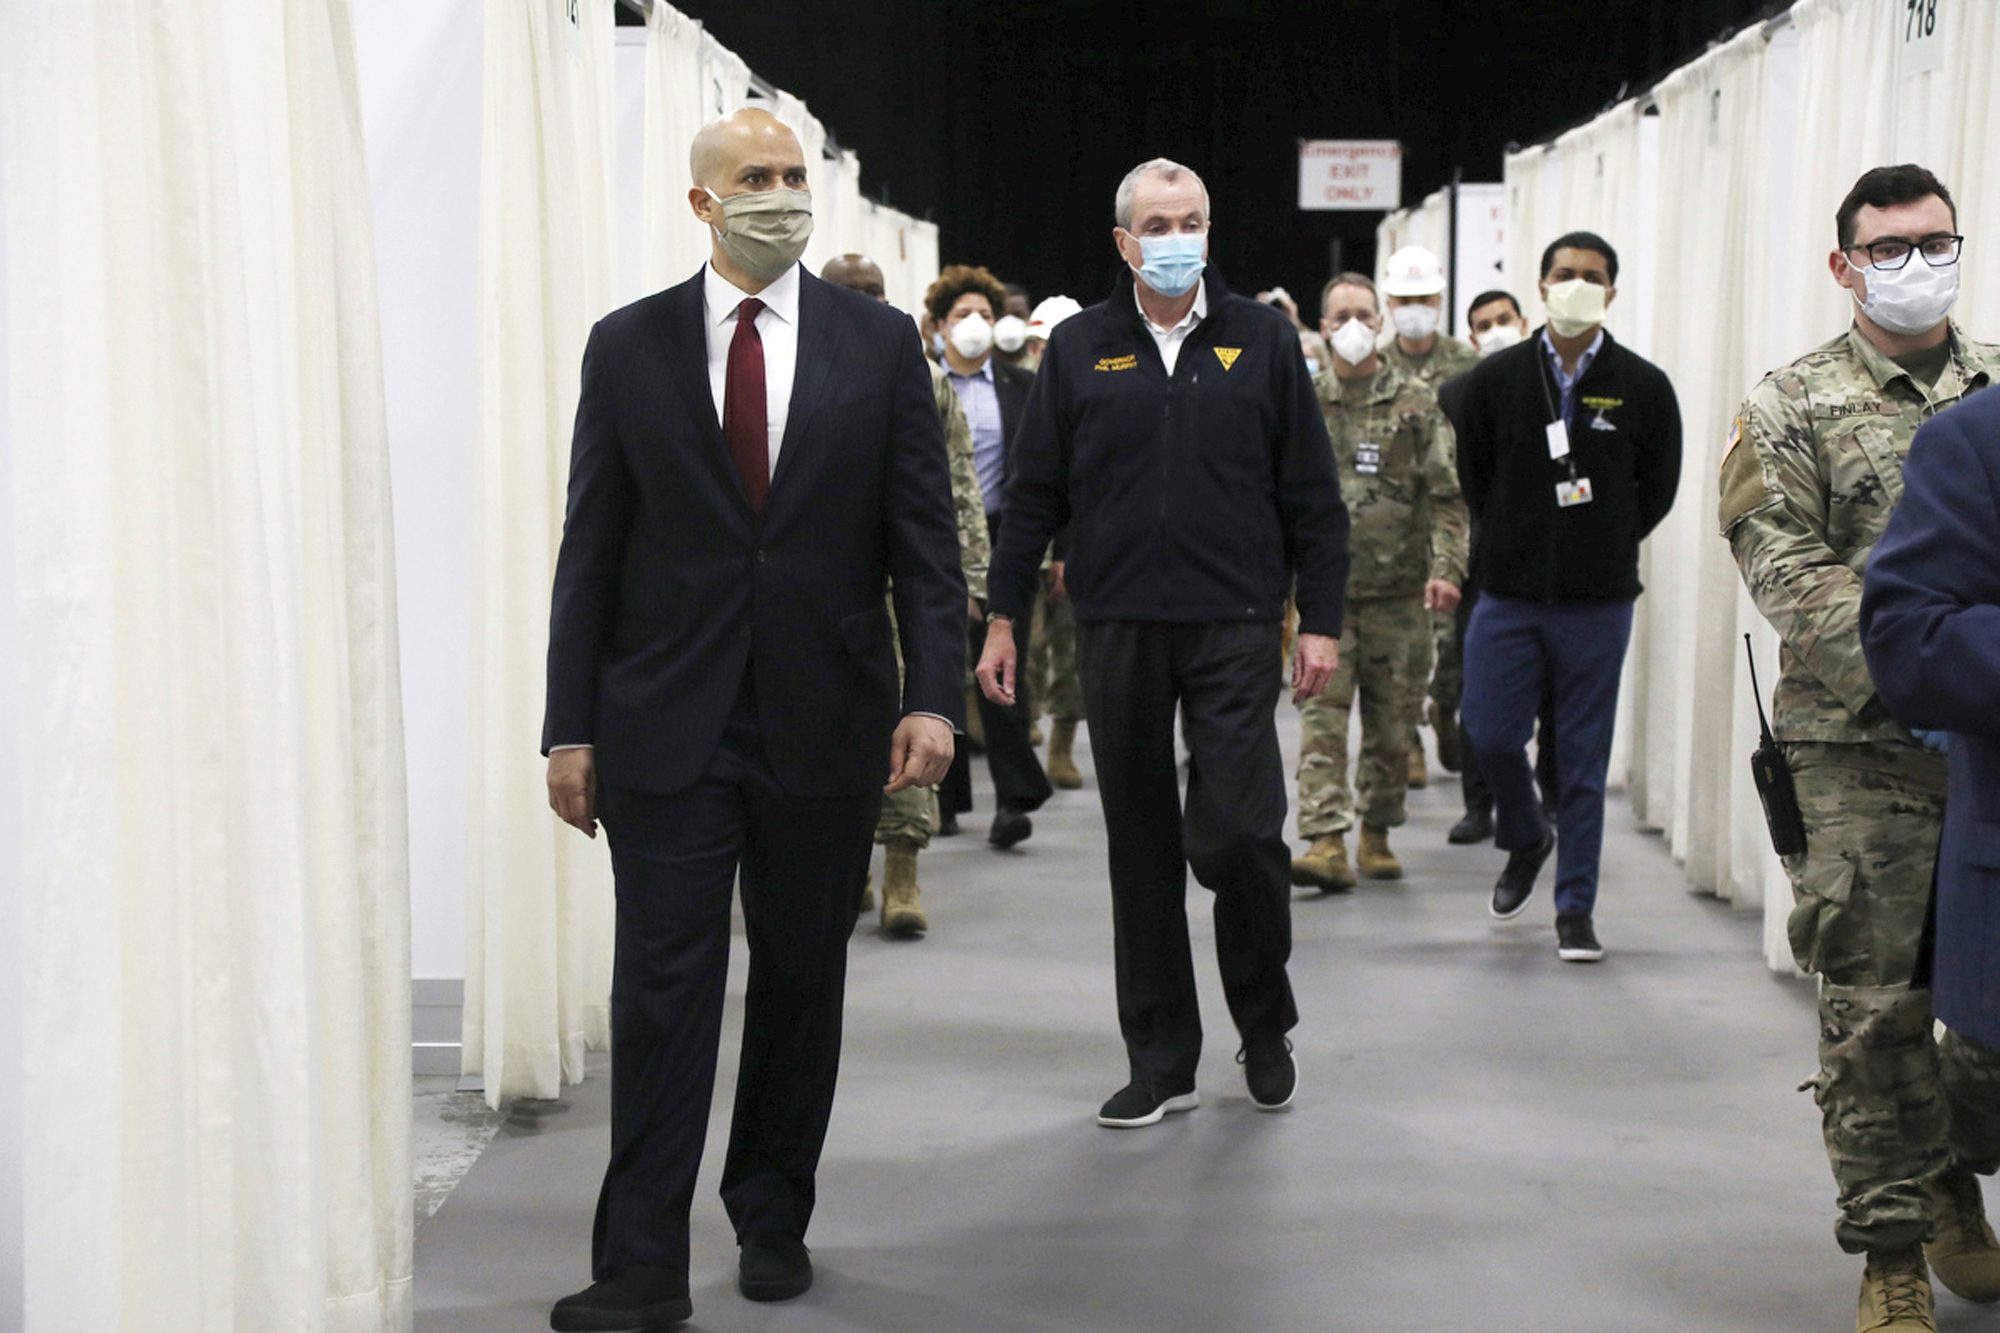 PHOTO: Sen. Cory Booker and New Jersey Gov. Phil Murphy tour the Edison Field Medical Station at the site of the N.J. Convention & Exposition Center in Edison, N.J., April 8, 2020.